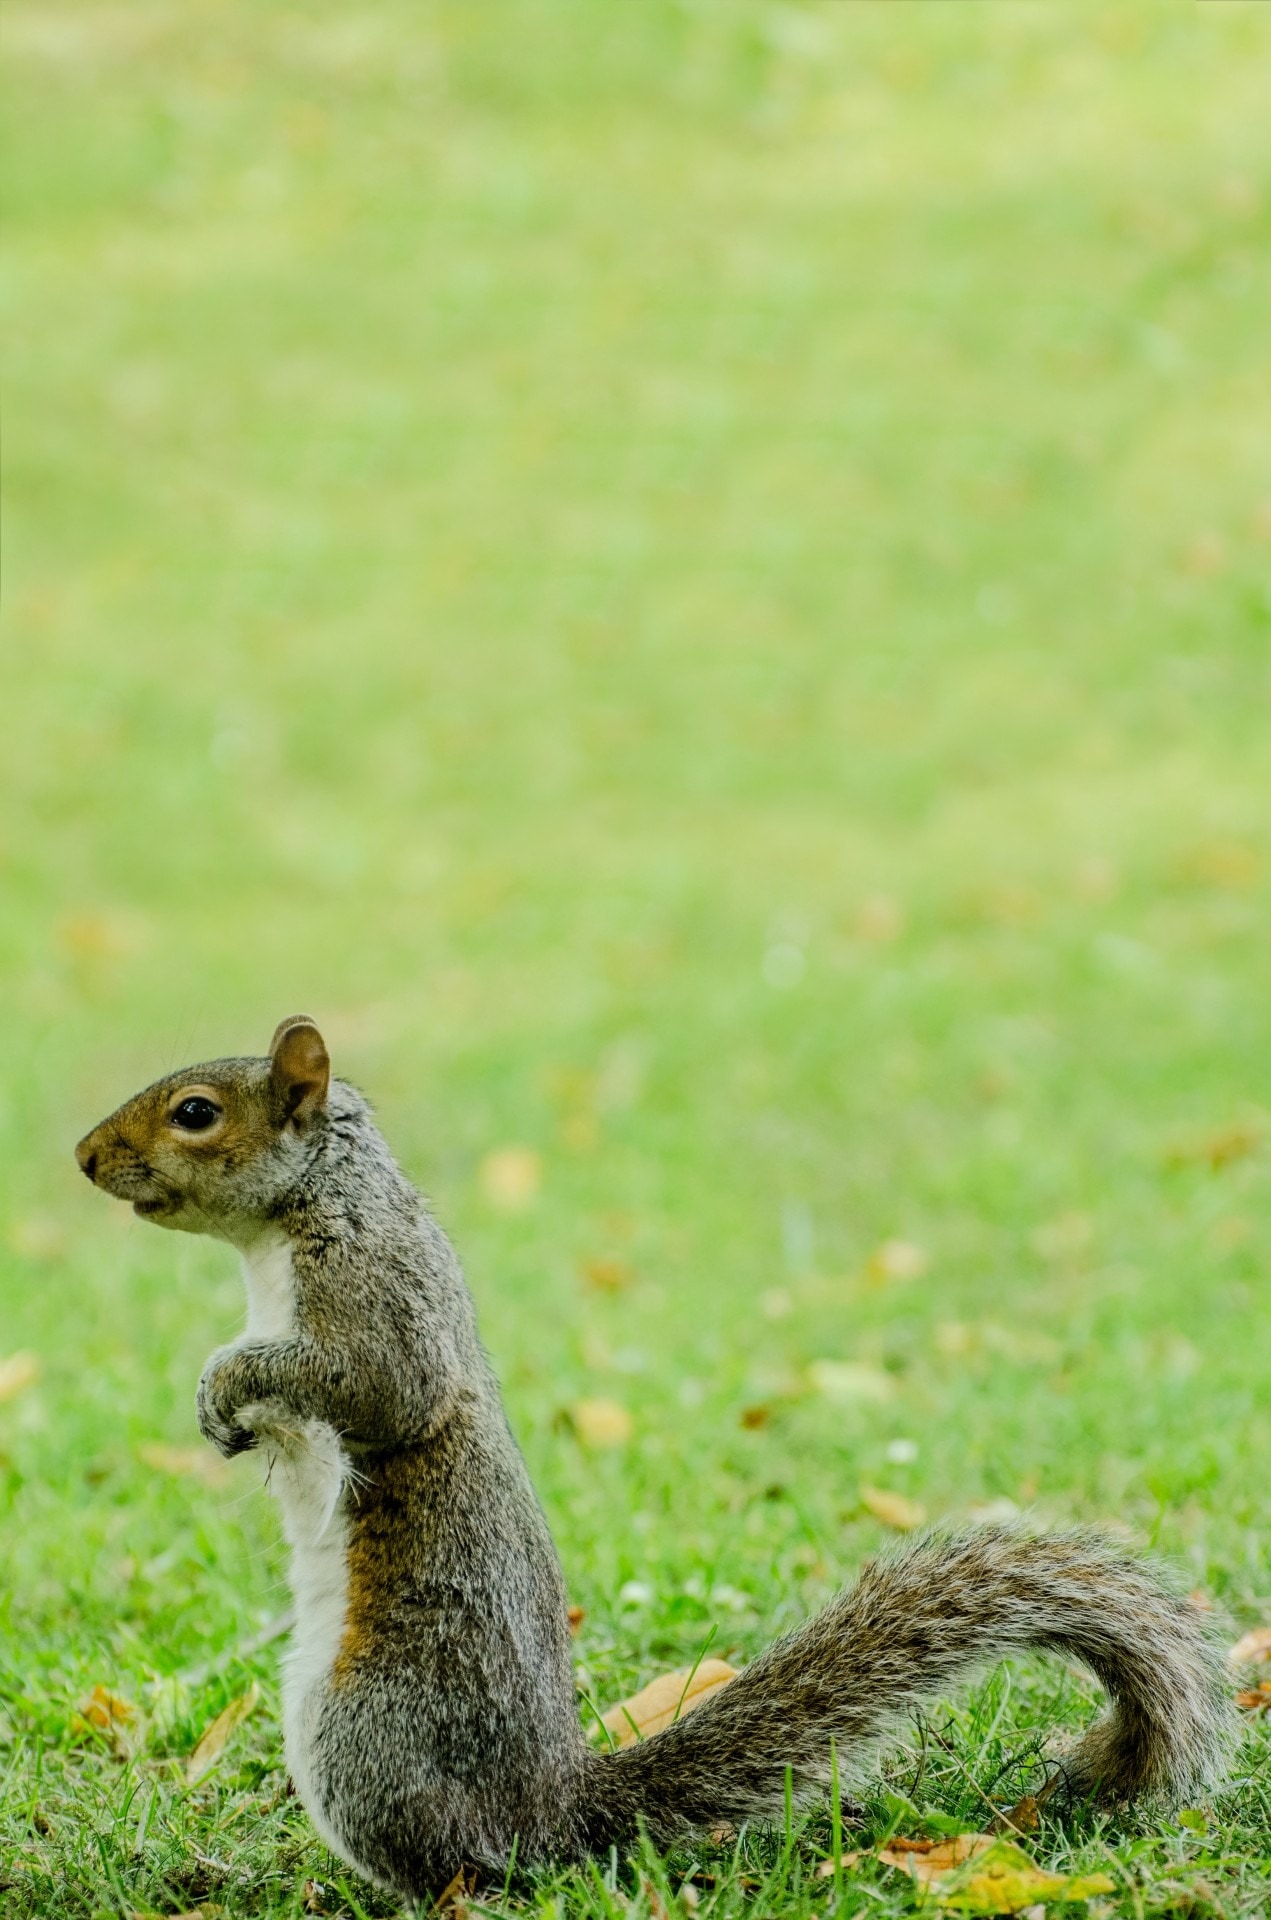 white and brown squirrel on green grass field